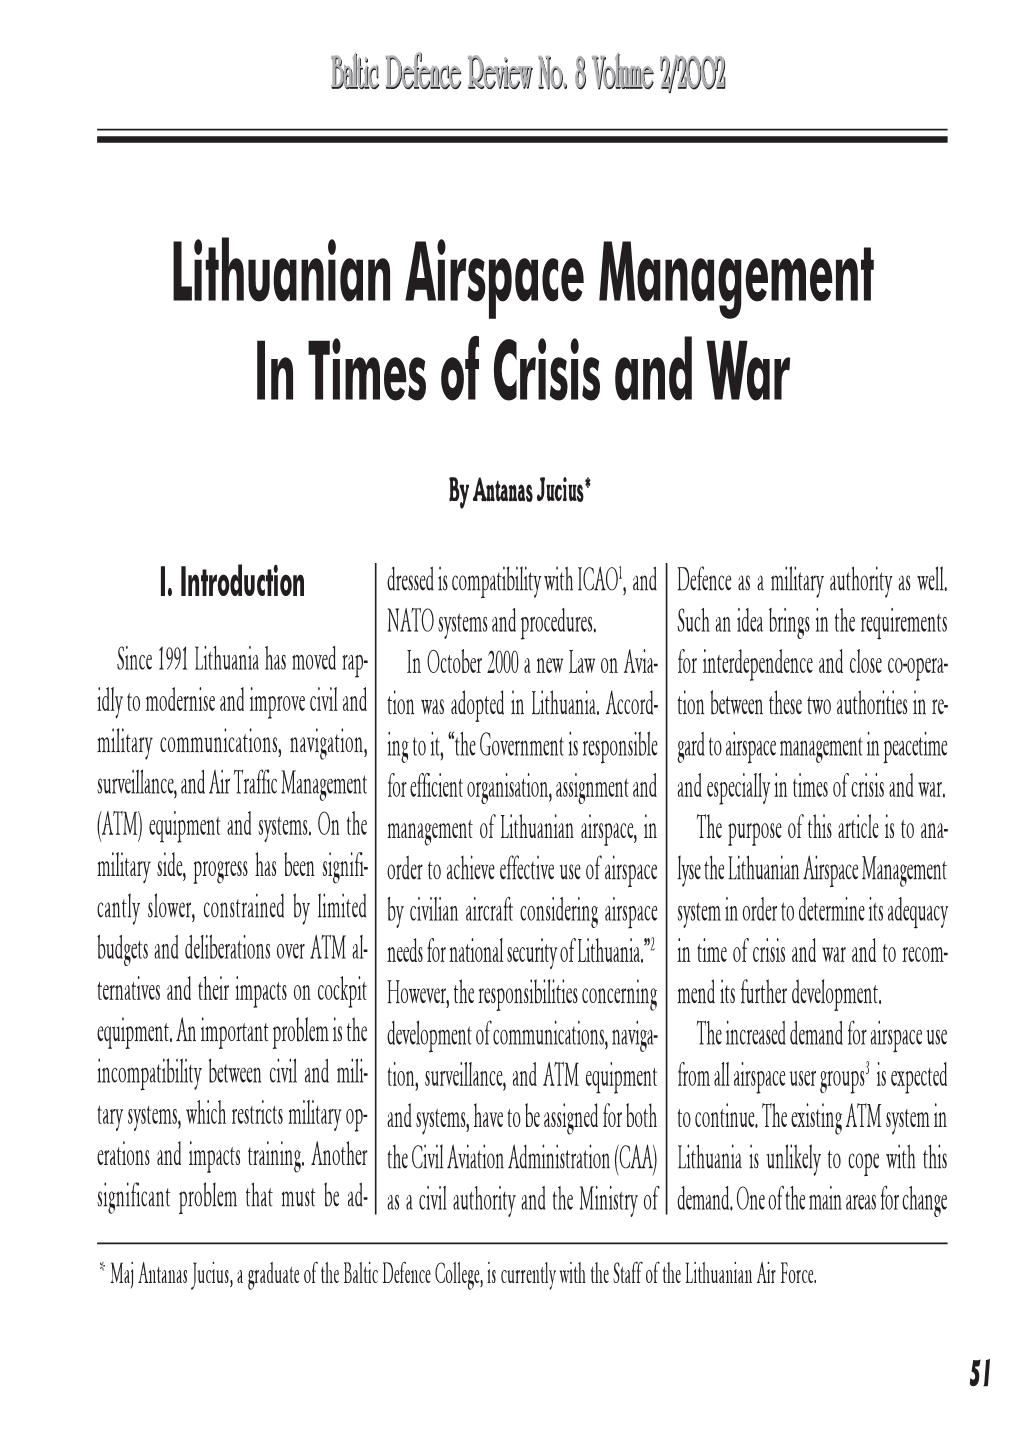 Lithuanian Airspace Management in Times of Crisis and War